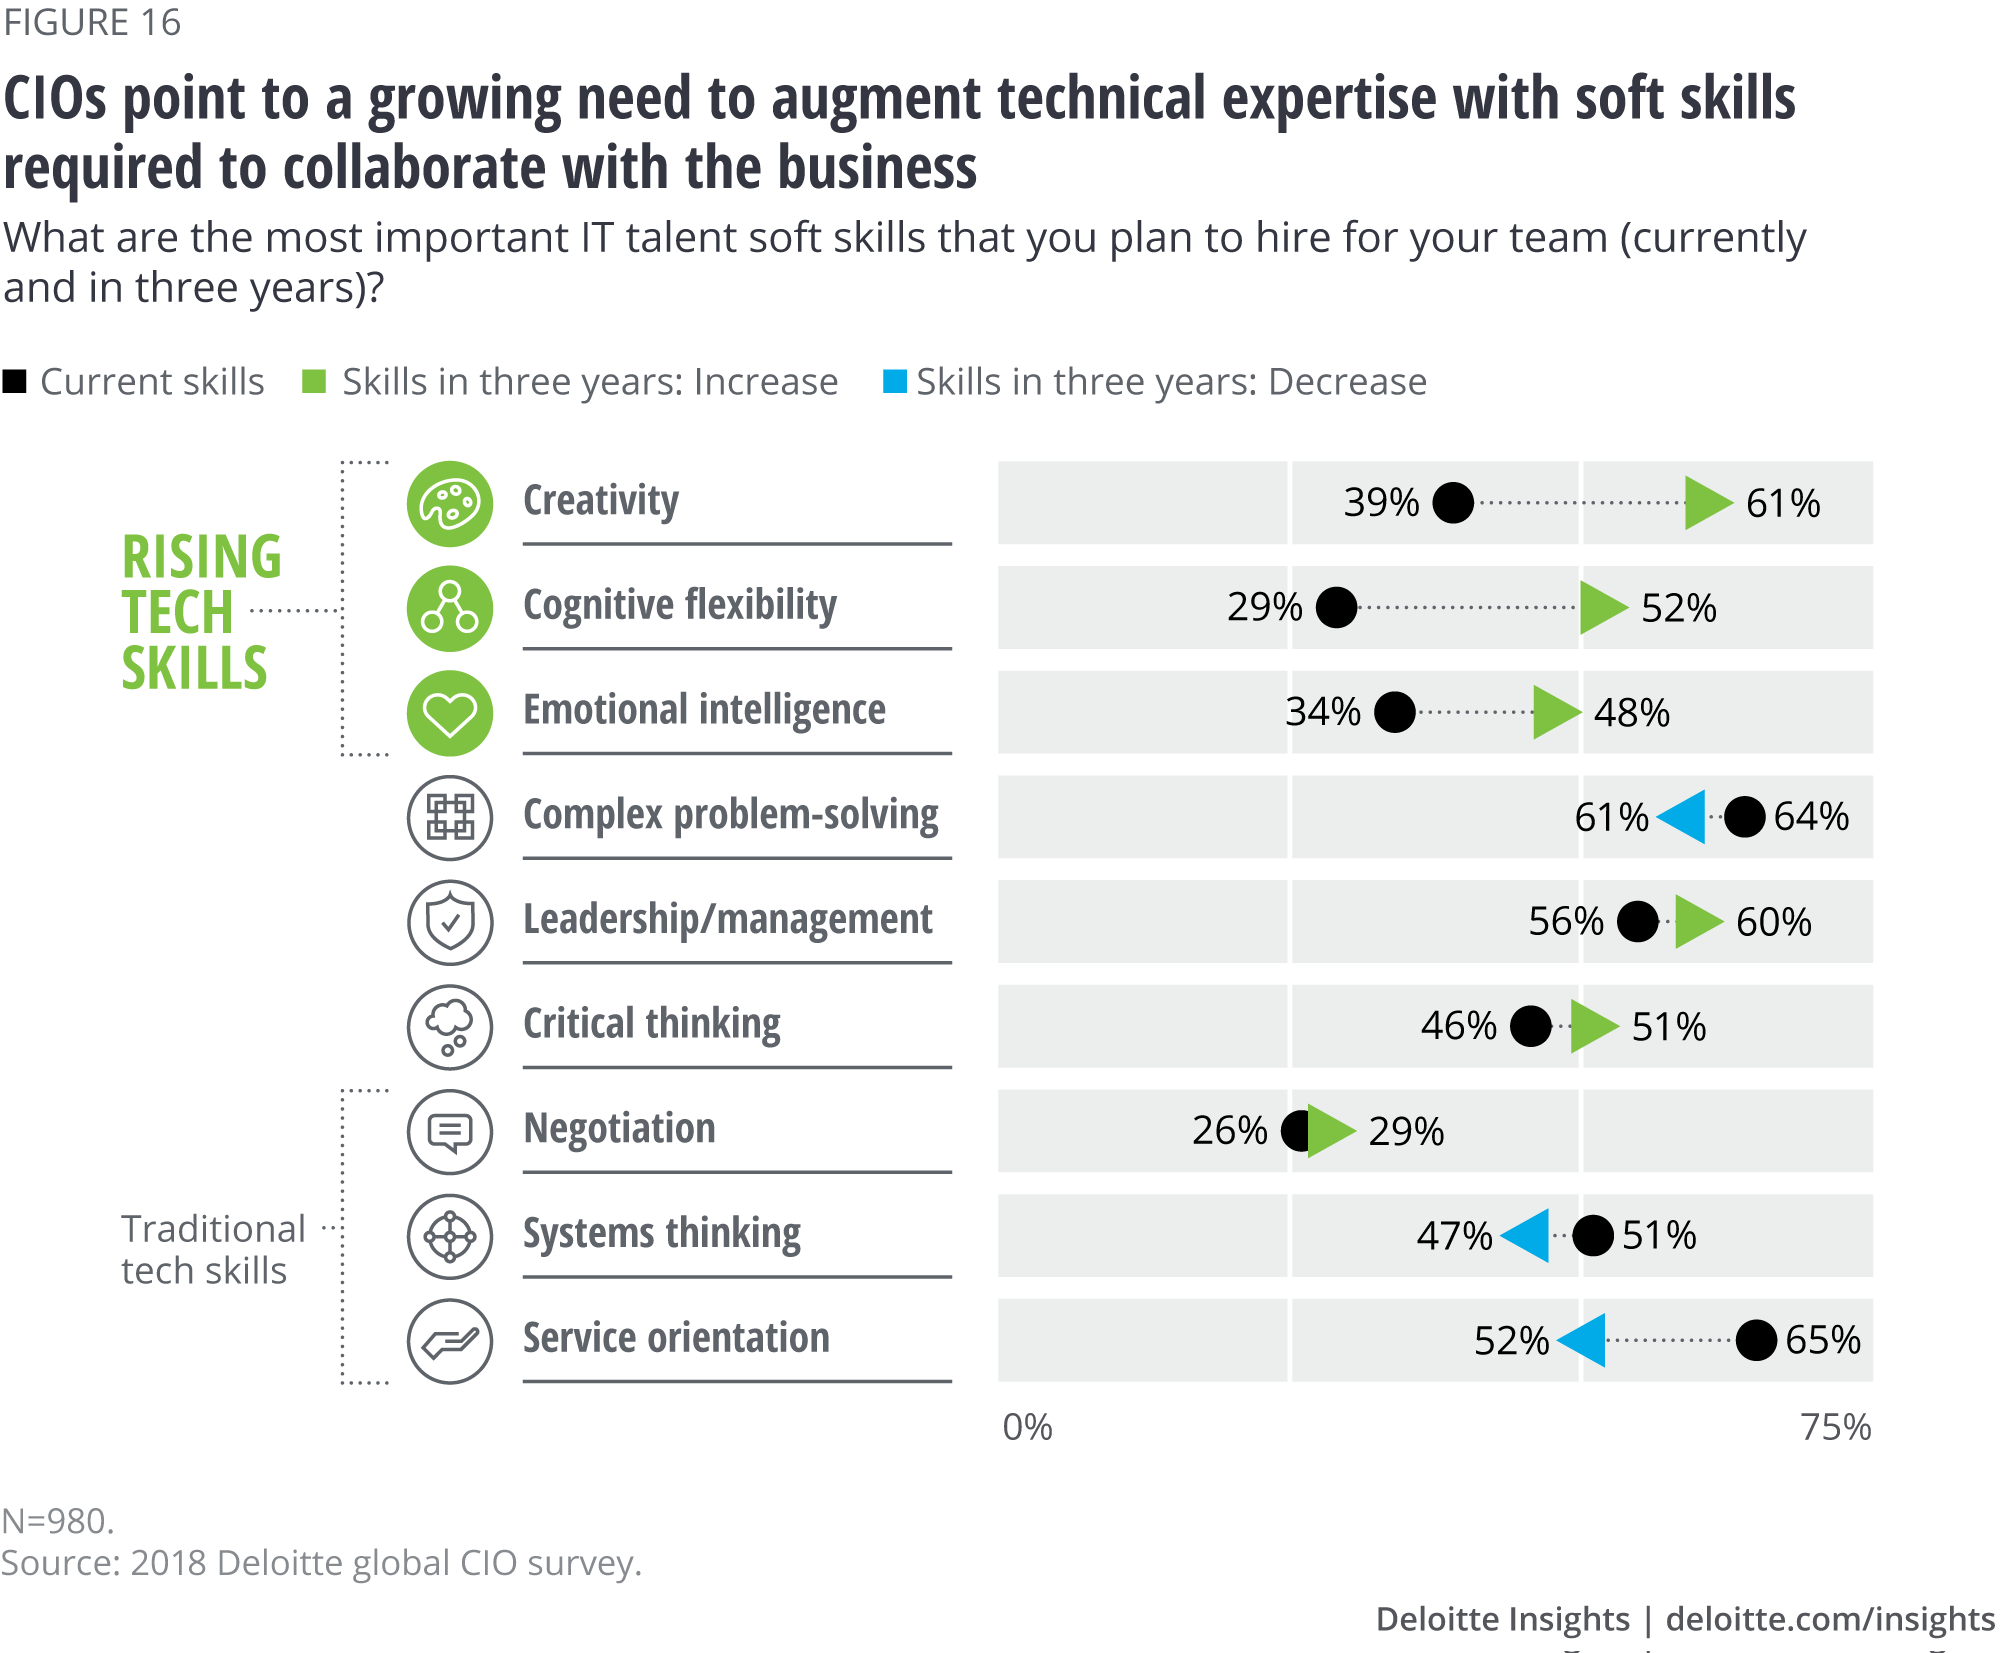 CIOs point to a growing need to augment technical expertise with soft skills required to collaborate with the business